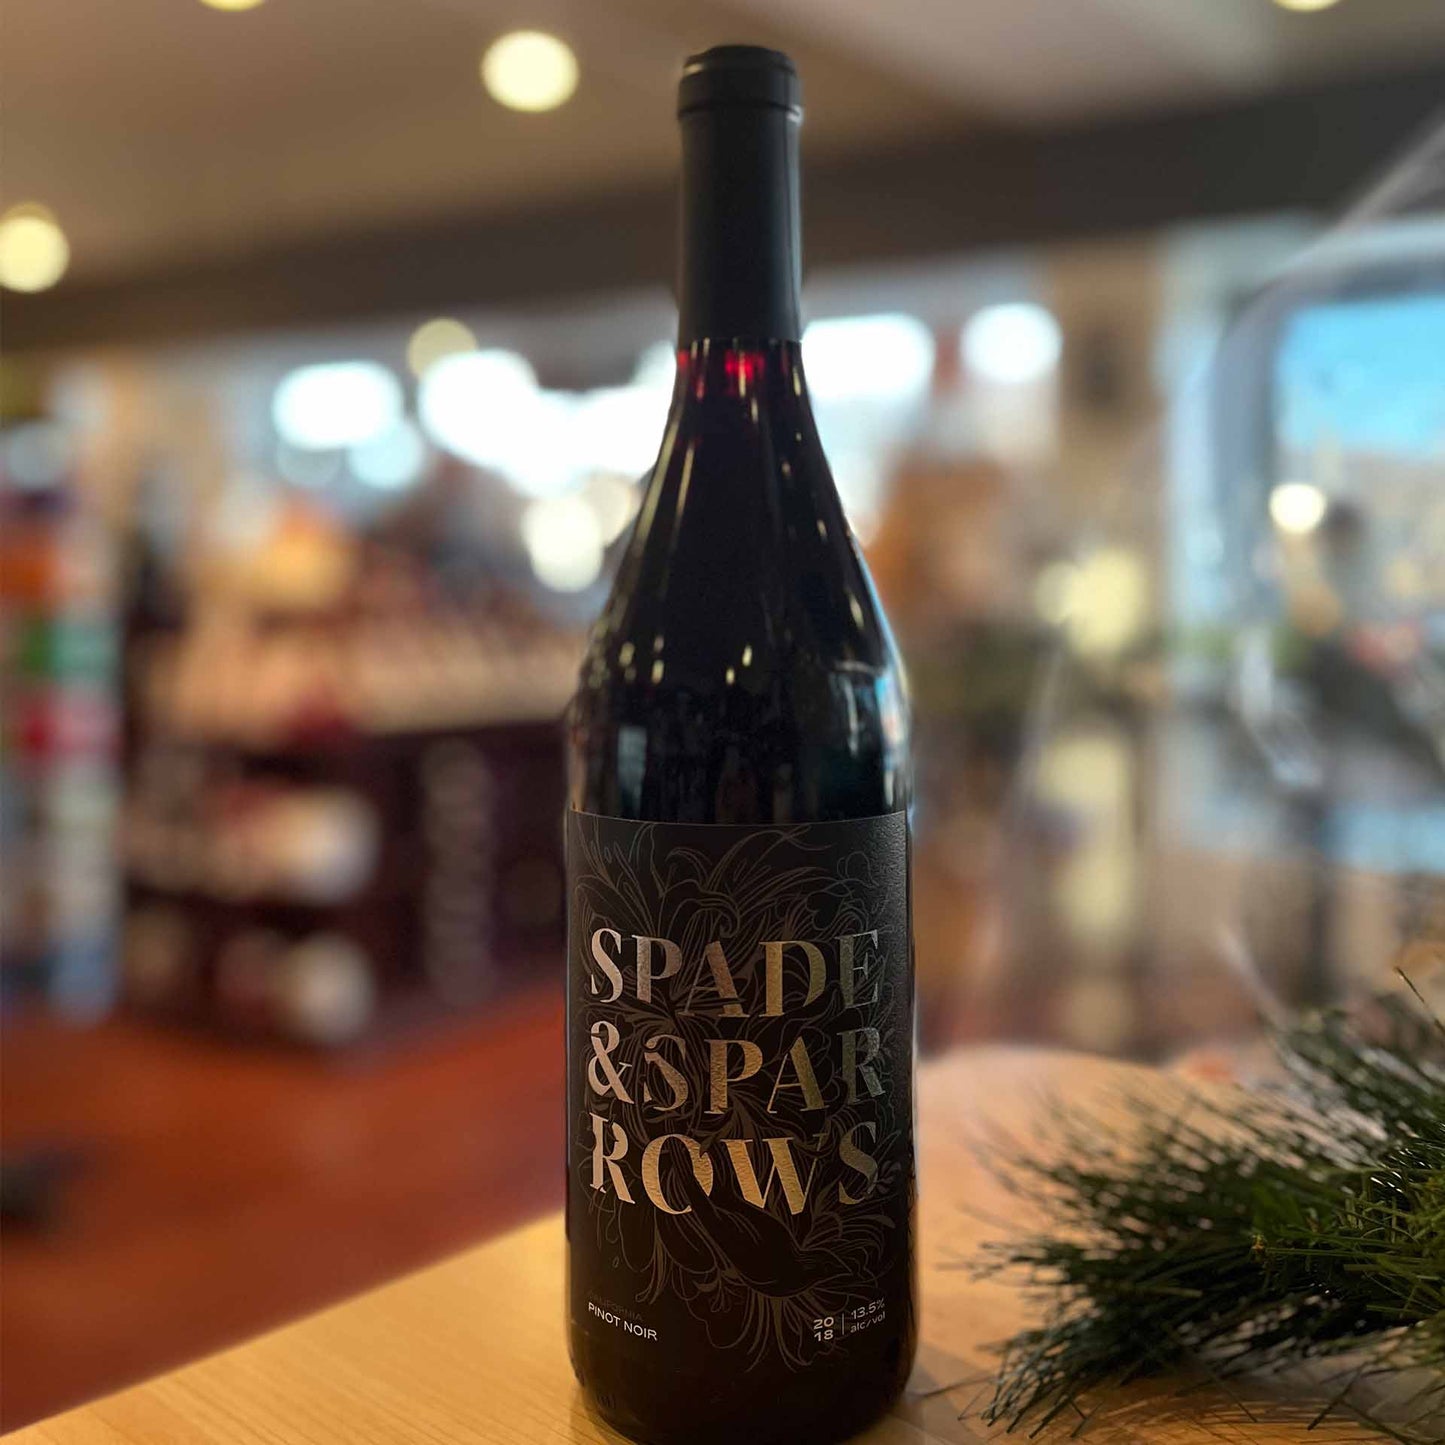 SPADE and SPARROWS PINOT NOIR